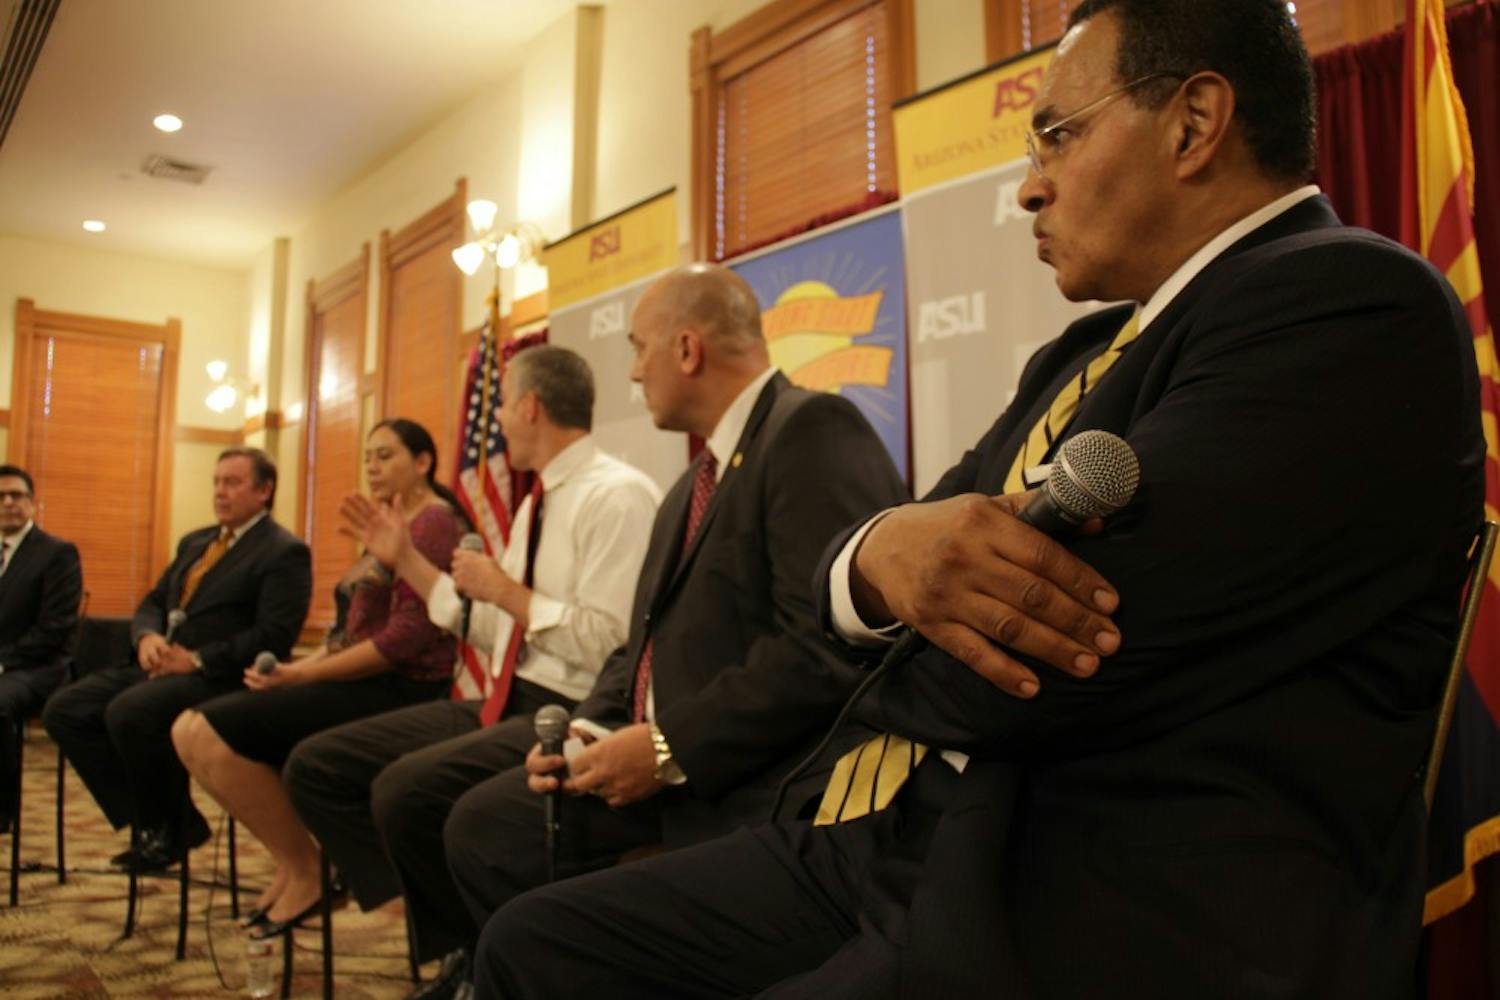 The Back to School Bus Tour in Old Main on Wednesday afternoon featured panelists of various leaders in the education field to answer ASU students’ questions. ASU President Michael Crow, Alejandra Ceja, executive director of the White House Initiative on Educational Excellence for Hispanics, and Arne Duncan, U.S. secretary of education, Kent Scribner, superintendent of Phoenix Union High School District, and Freeman Hrabowski, University of Maryland president, were on the panel. (Photo by Shawn Raymundo)